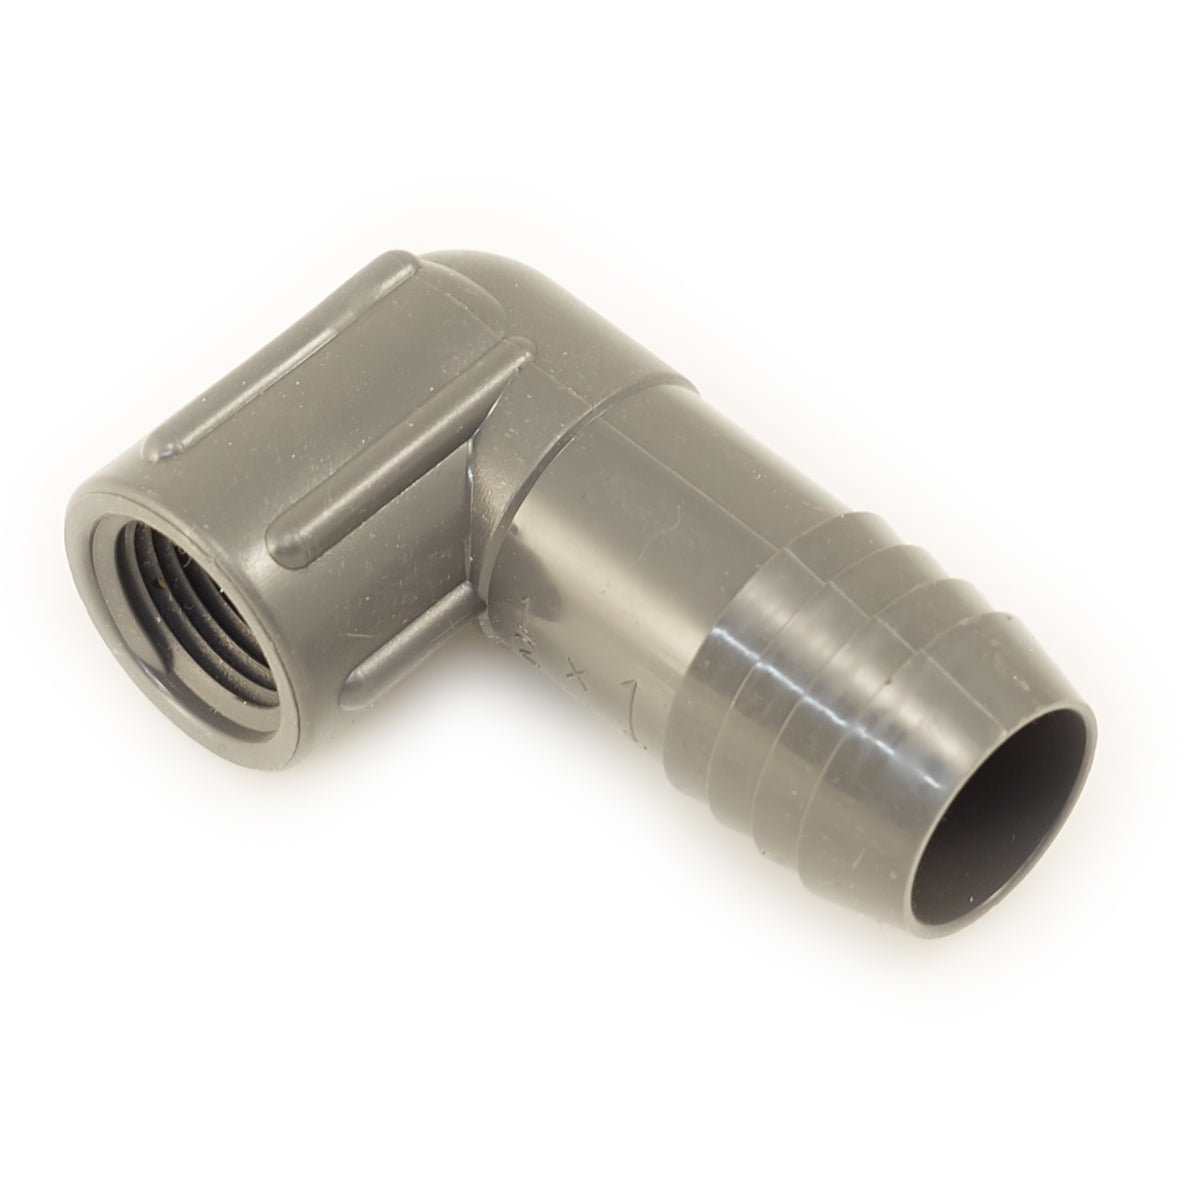 3/4" Mainline End Elbow (Bottom Piece w/1/2" Threaded Hole to Fit Threaded Manifold Top)